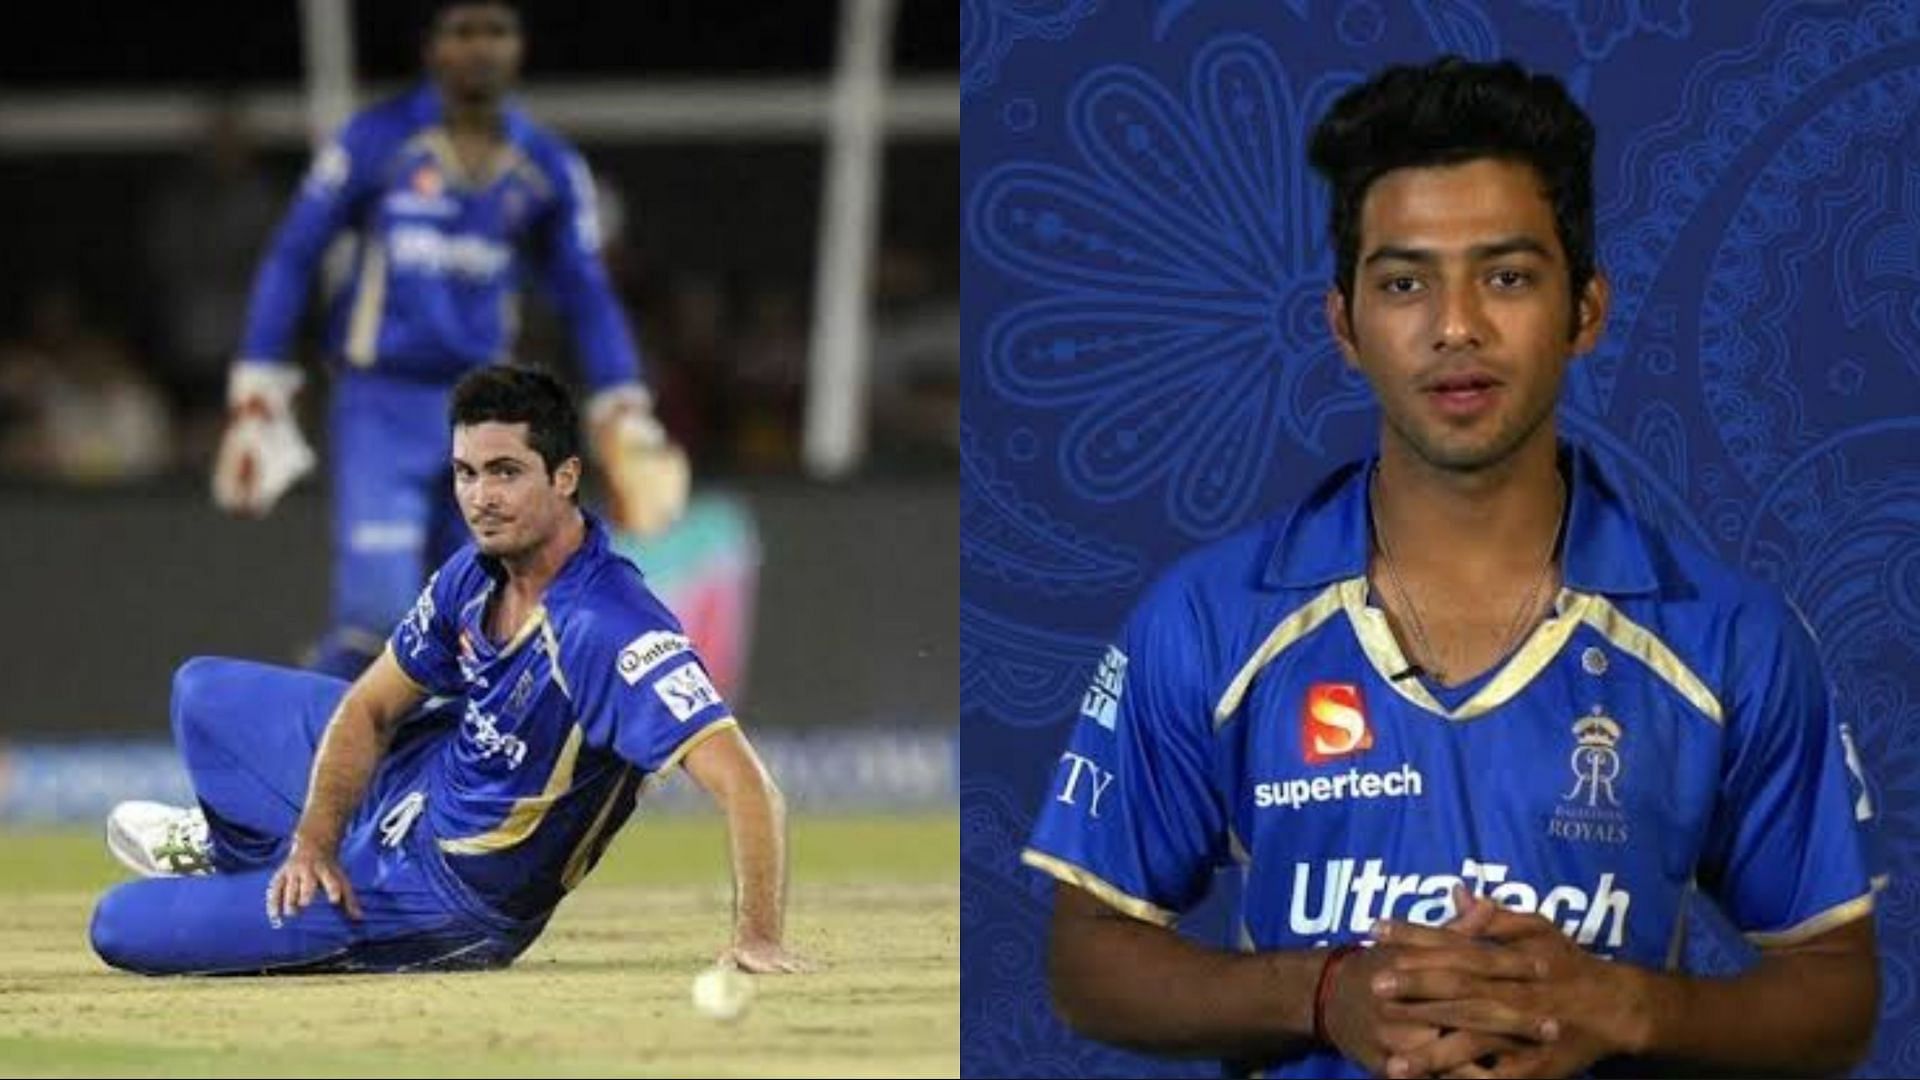 Ben Cutting (L) and Unmukt Chand played one match for the Rajasthan Royals (Image Courtesy: IPLT20.com/Rajasthan Royals)